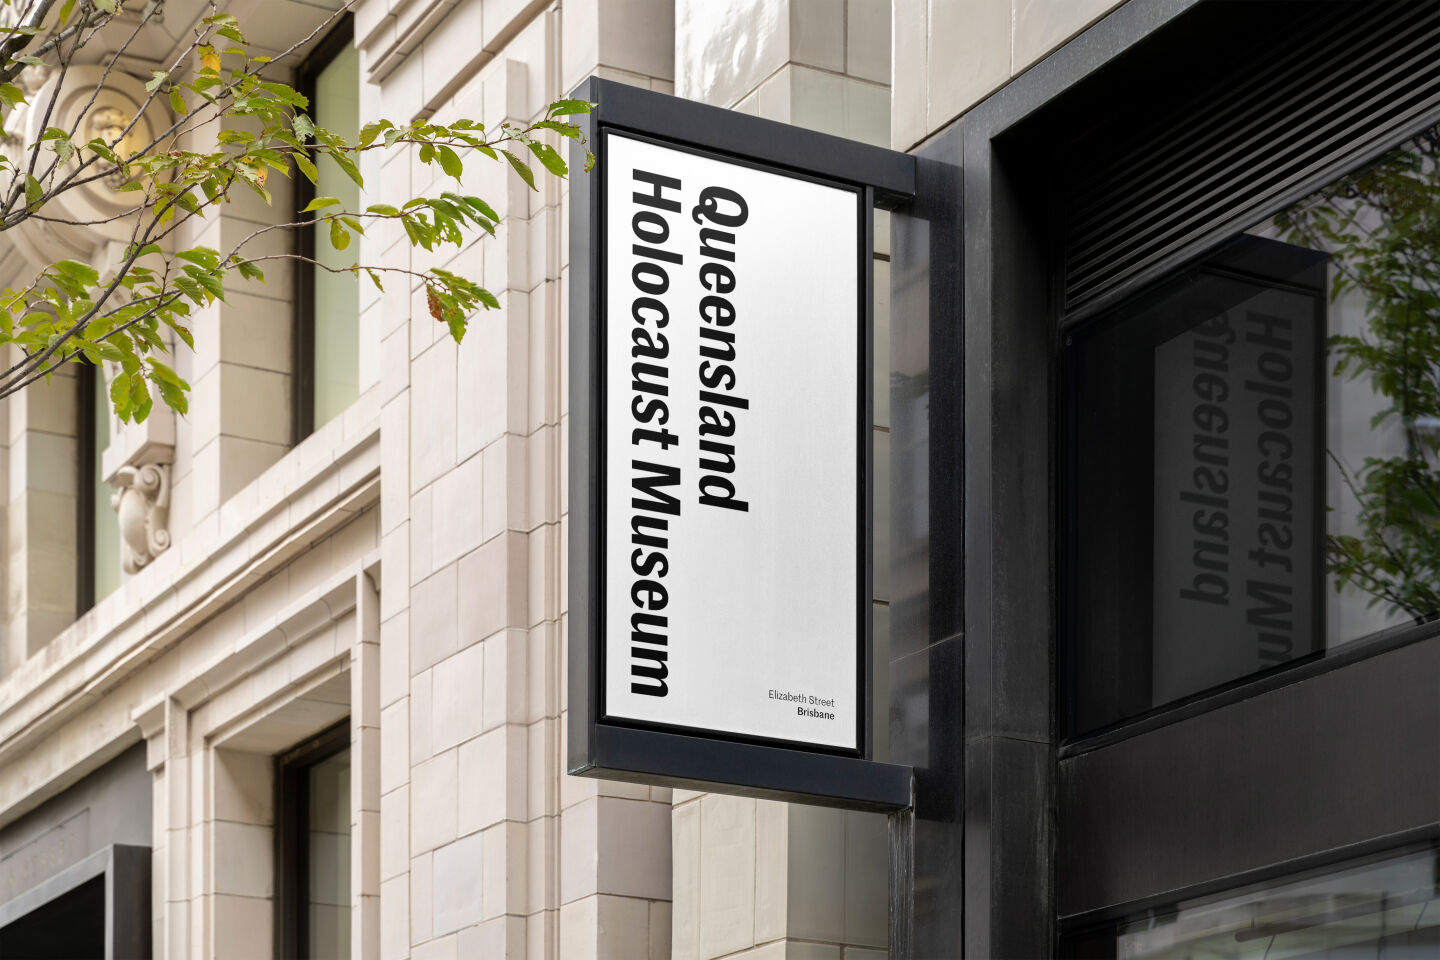 Sign for the Queensland Holocaust Museum featuring the logo